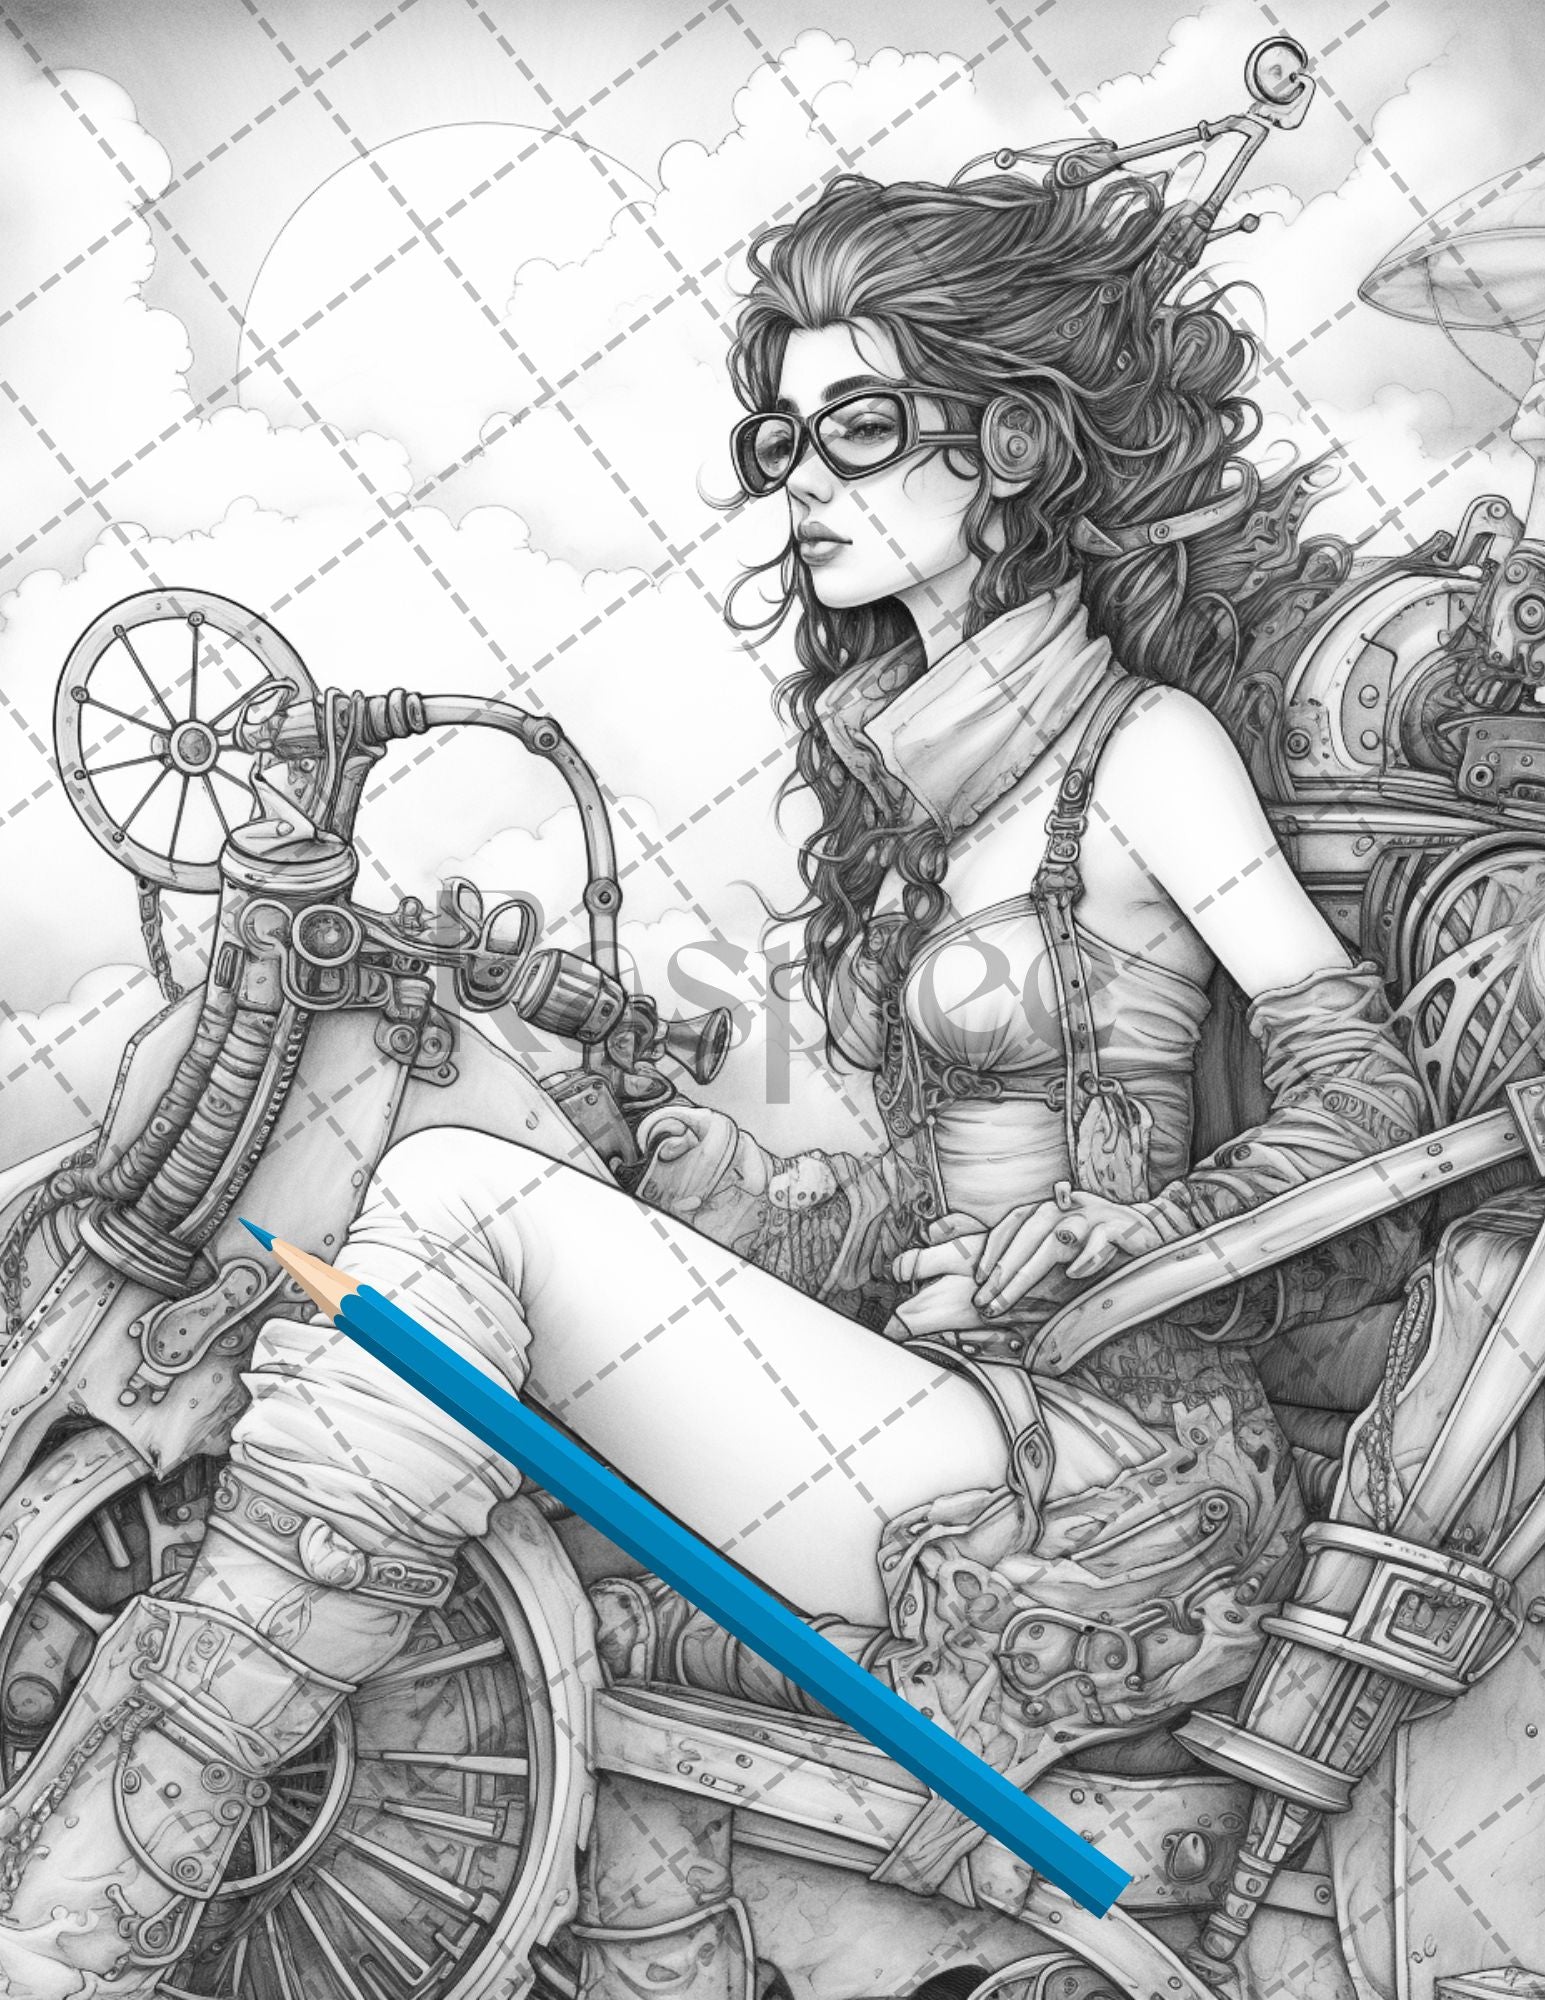 30 Steampunk Girls Coloring Pages Printable for Adults, Victorian Inspired Adult Grayscale Coloring Book, PDF File Download - raspiee